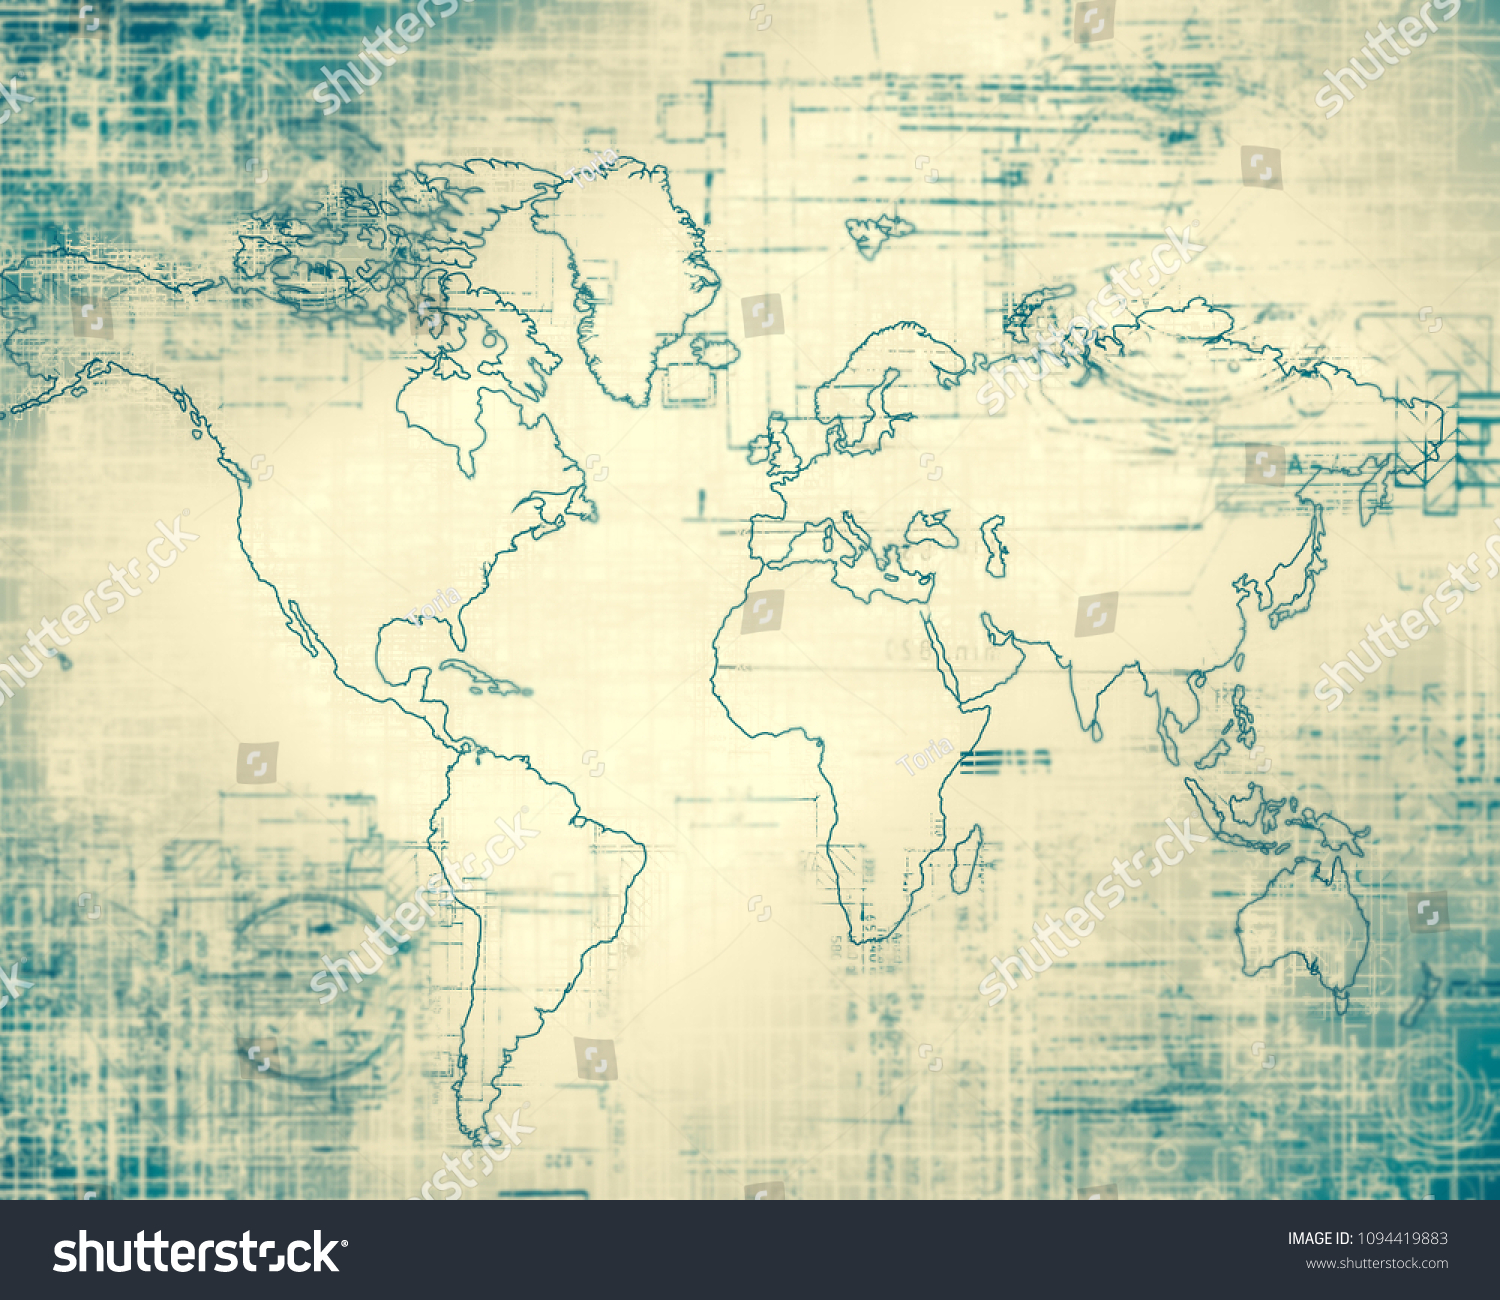 World map on a technological background, glowing lines symbols of the Internet, radio, television, mobile and satellite communications. #1094419883